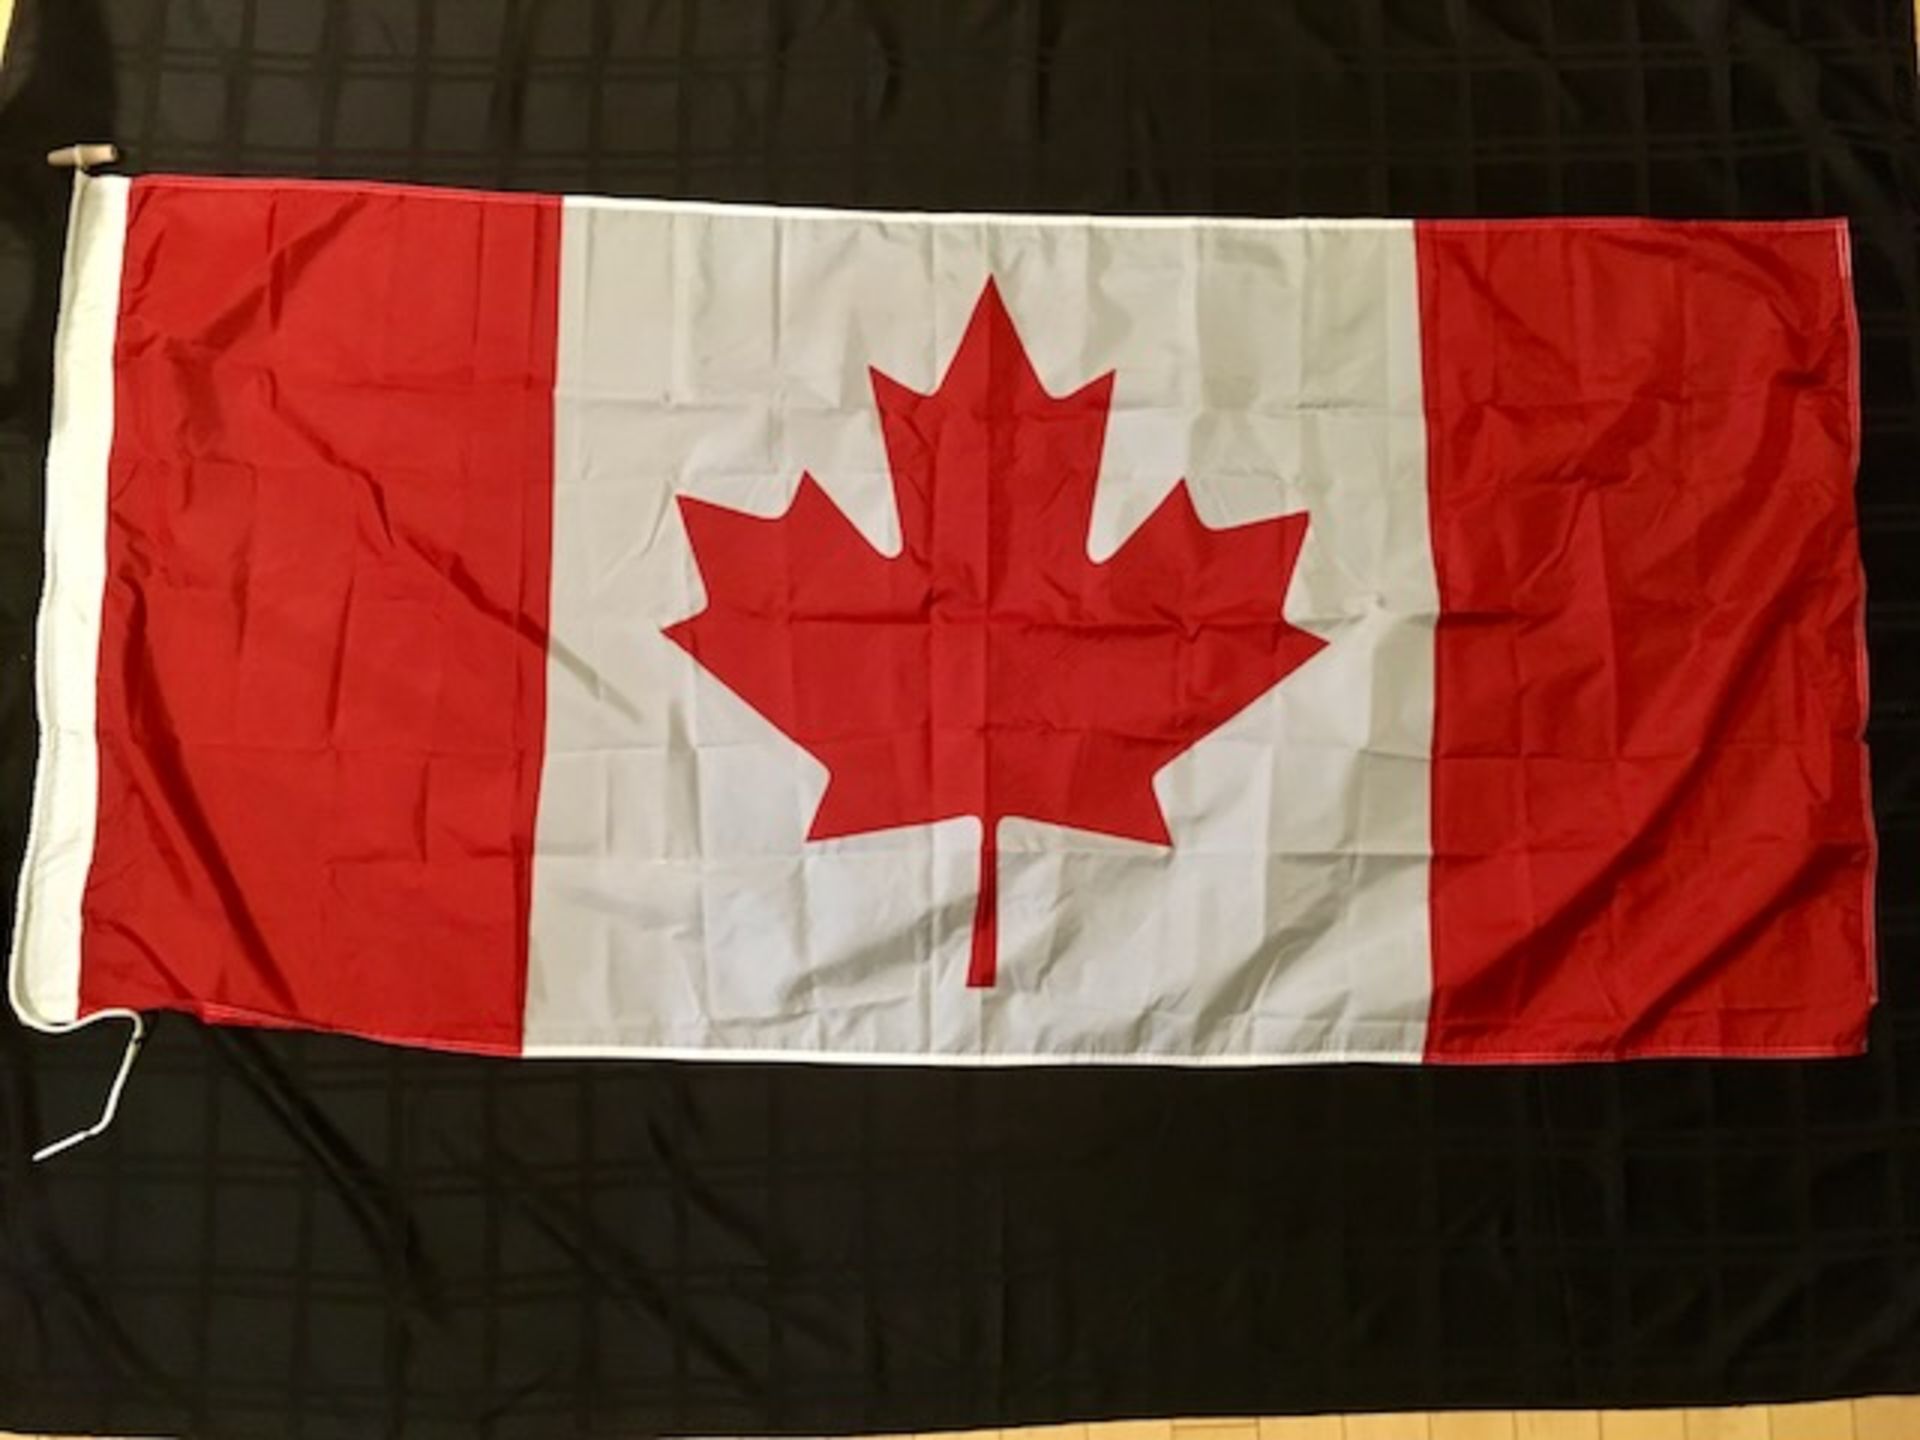 OUTDOOR CANADA FLAG 3FTx6FT - Image 2 of 2